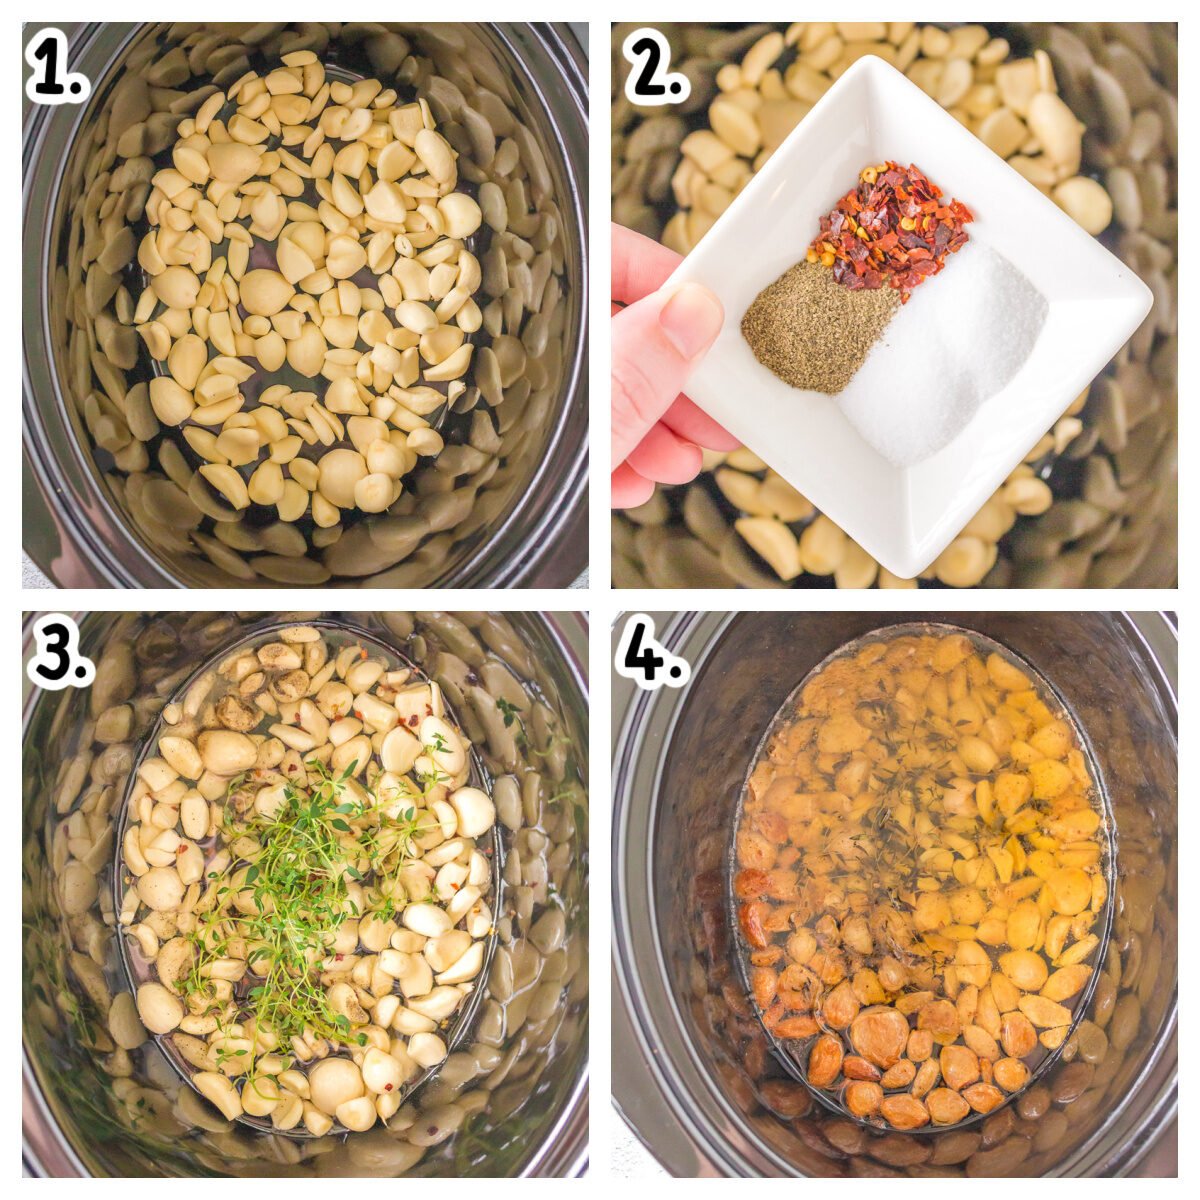 Four image collage on how to add ingredients to slow cooker for garlic confit.